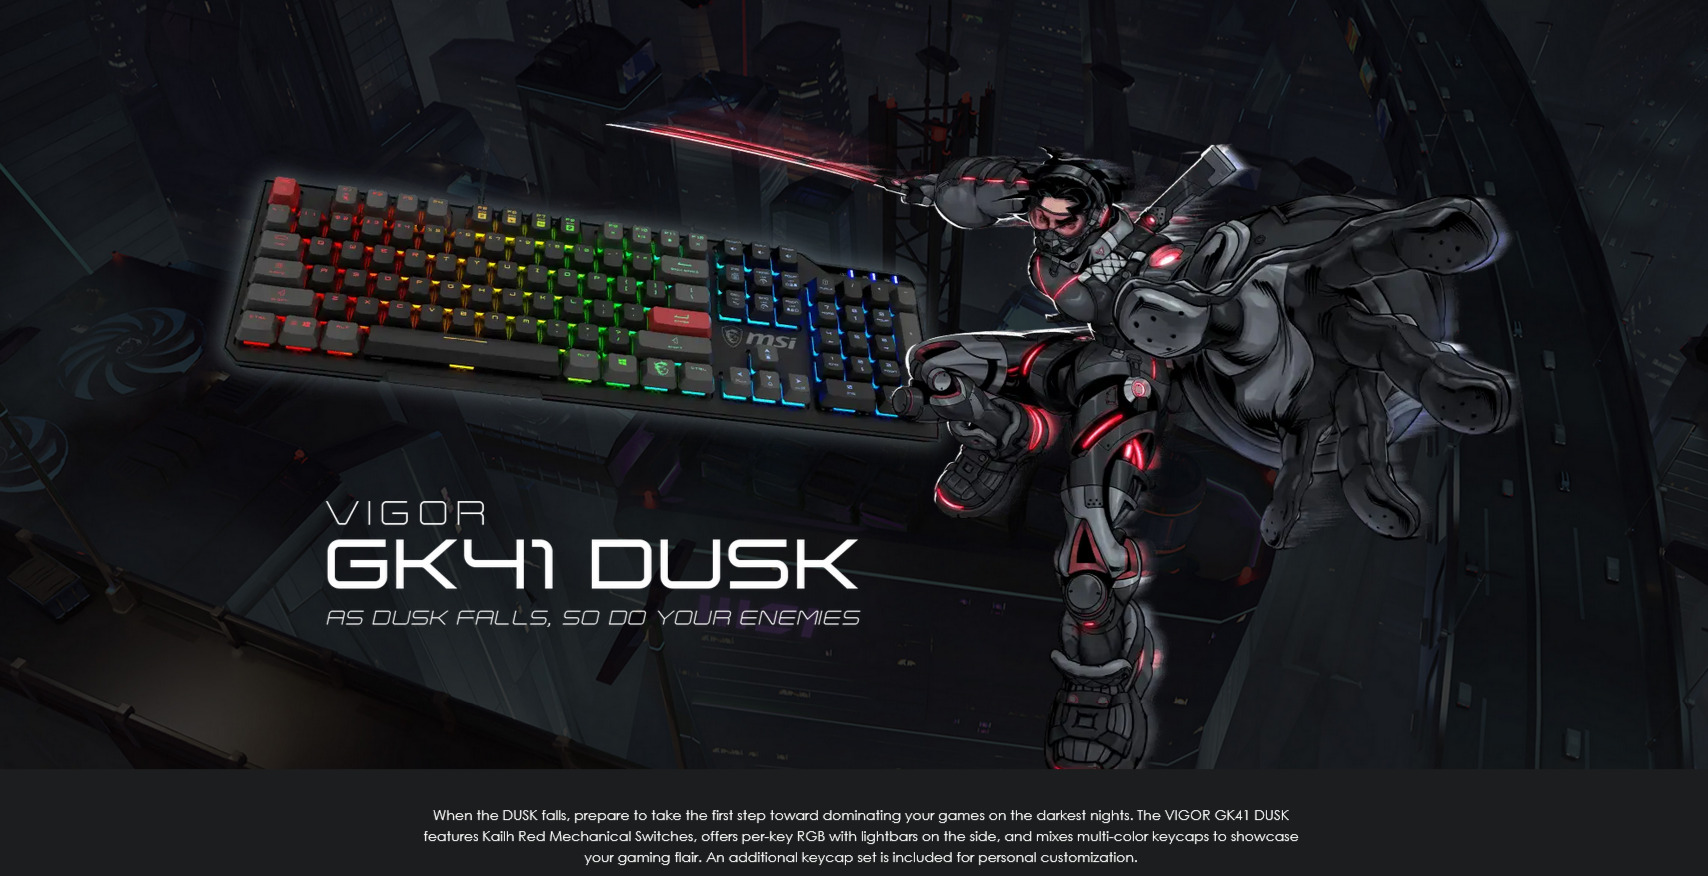 A large marketing image providing additional information about the product MSI VIGOR GK41 DUSK Gaming Keyboard - Kailh Red - Additional alt info not provided